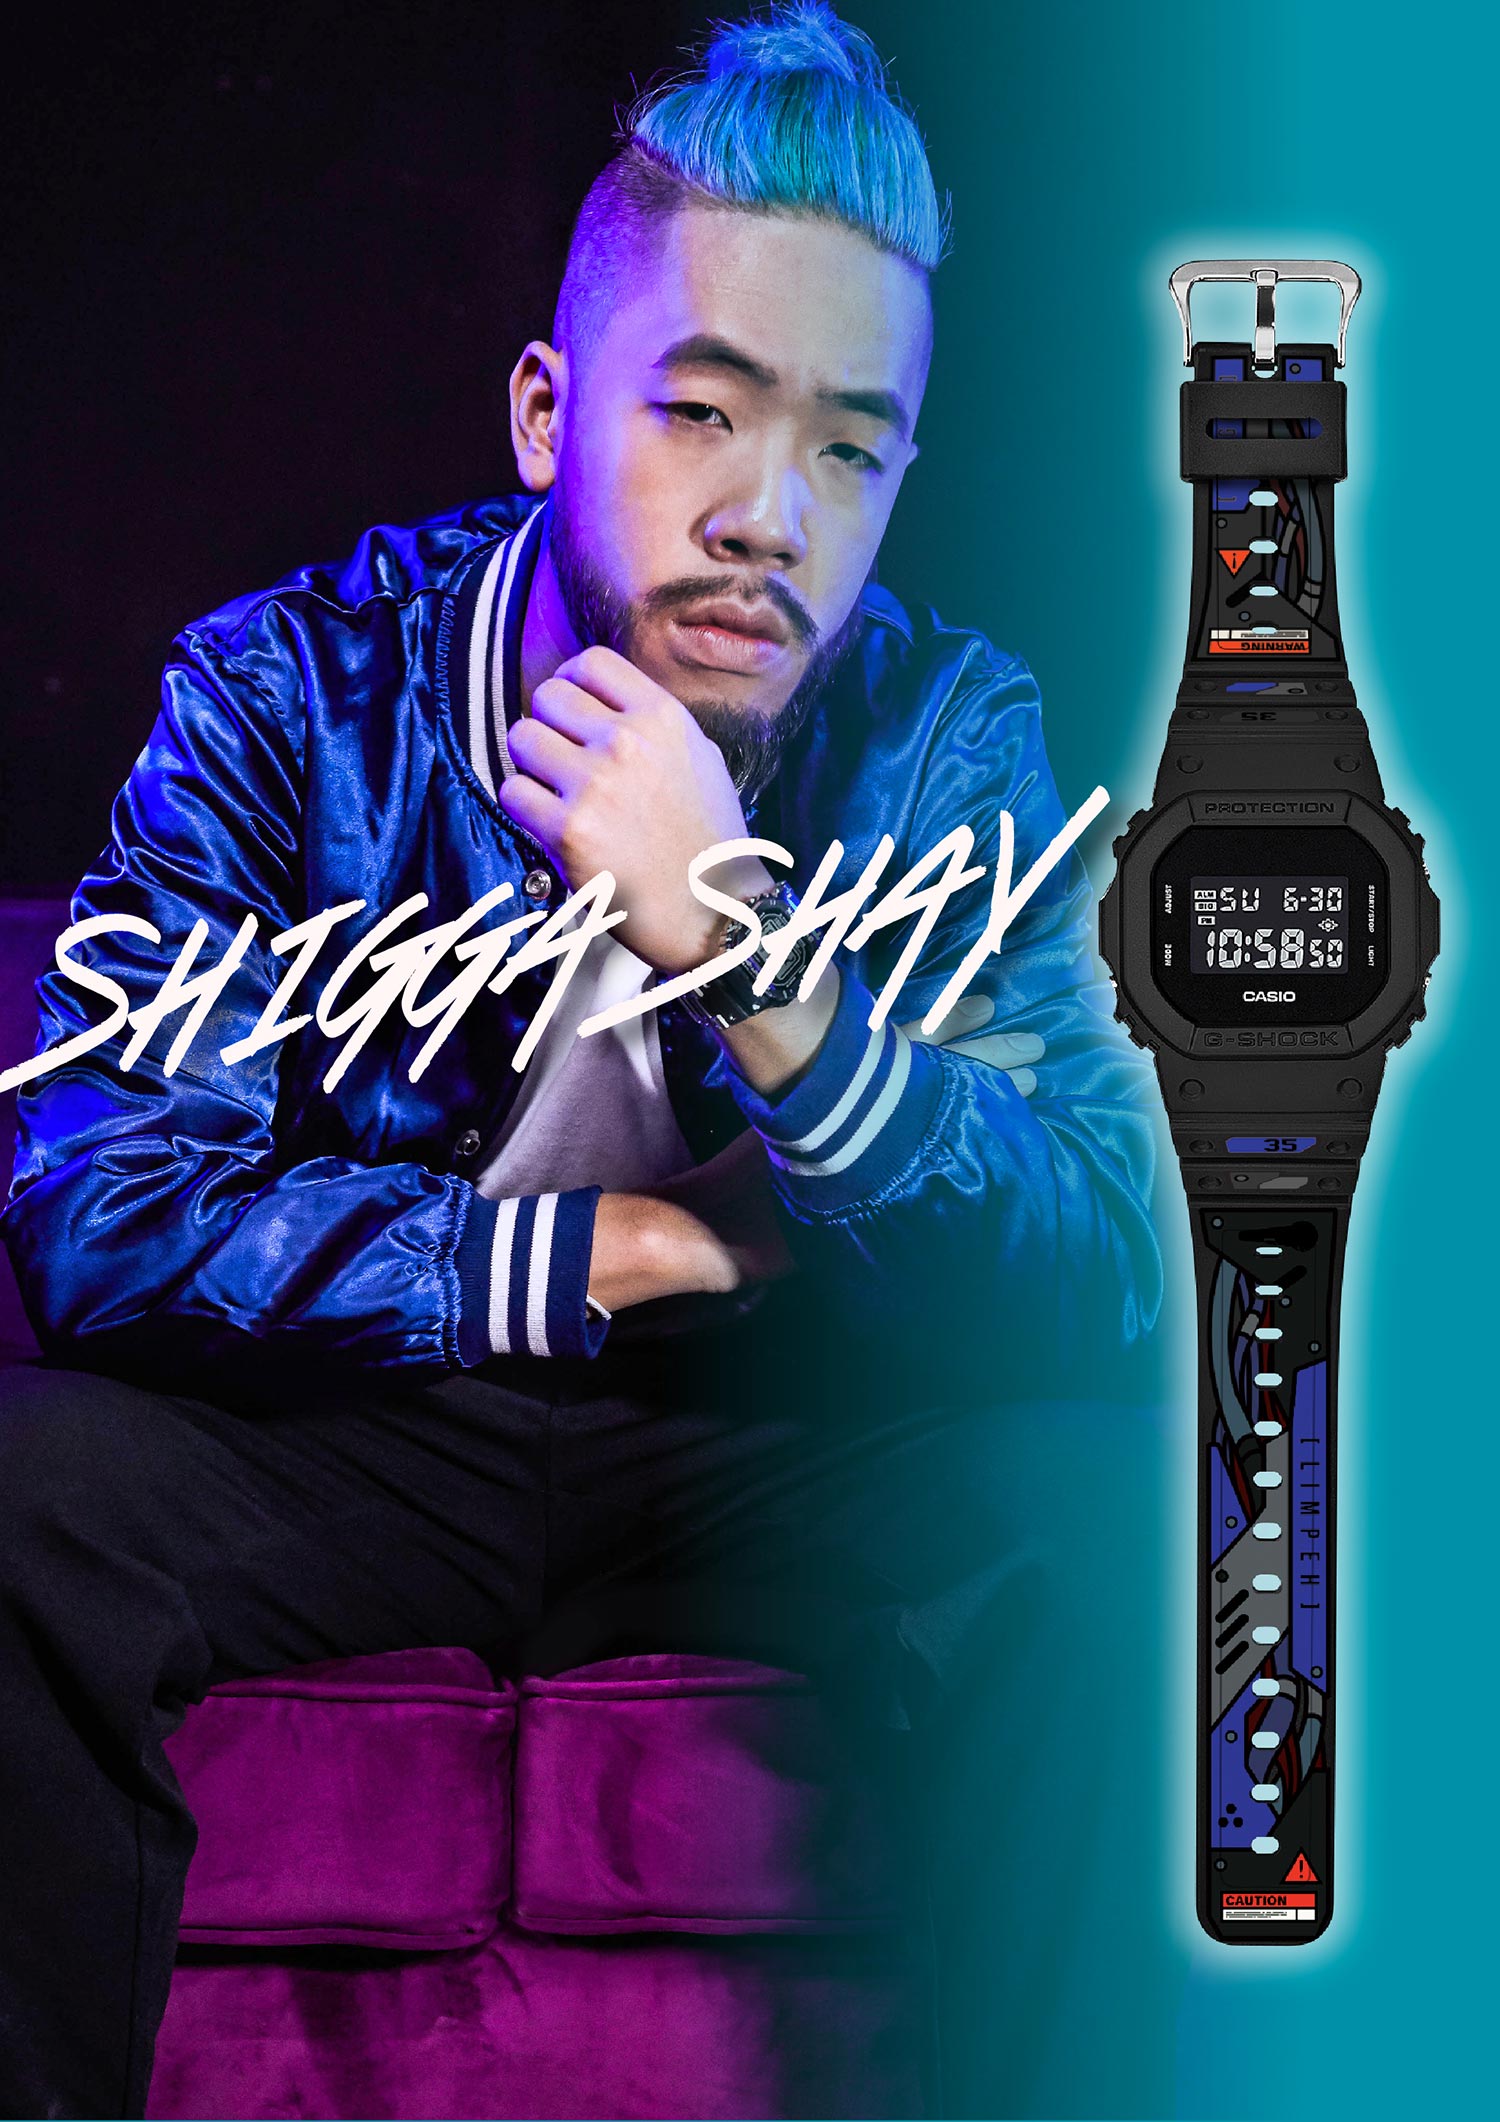 CASIO G-SHOCK Celebrates 35th Anniversary with Exciting Line-Up at G-Fest in Singapore